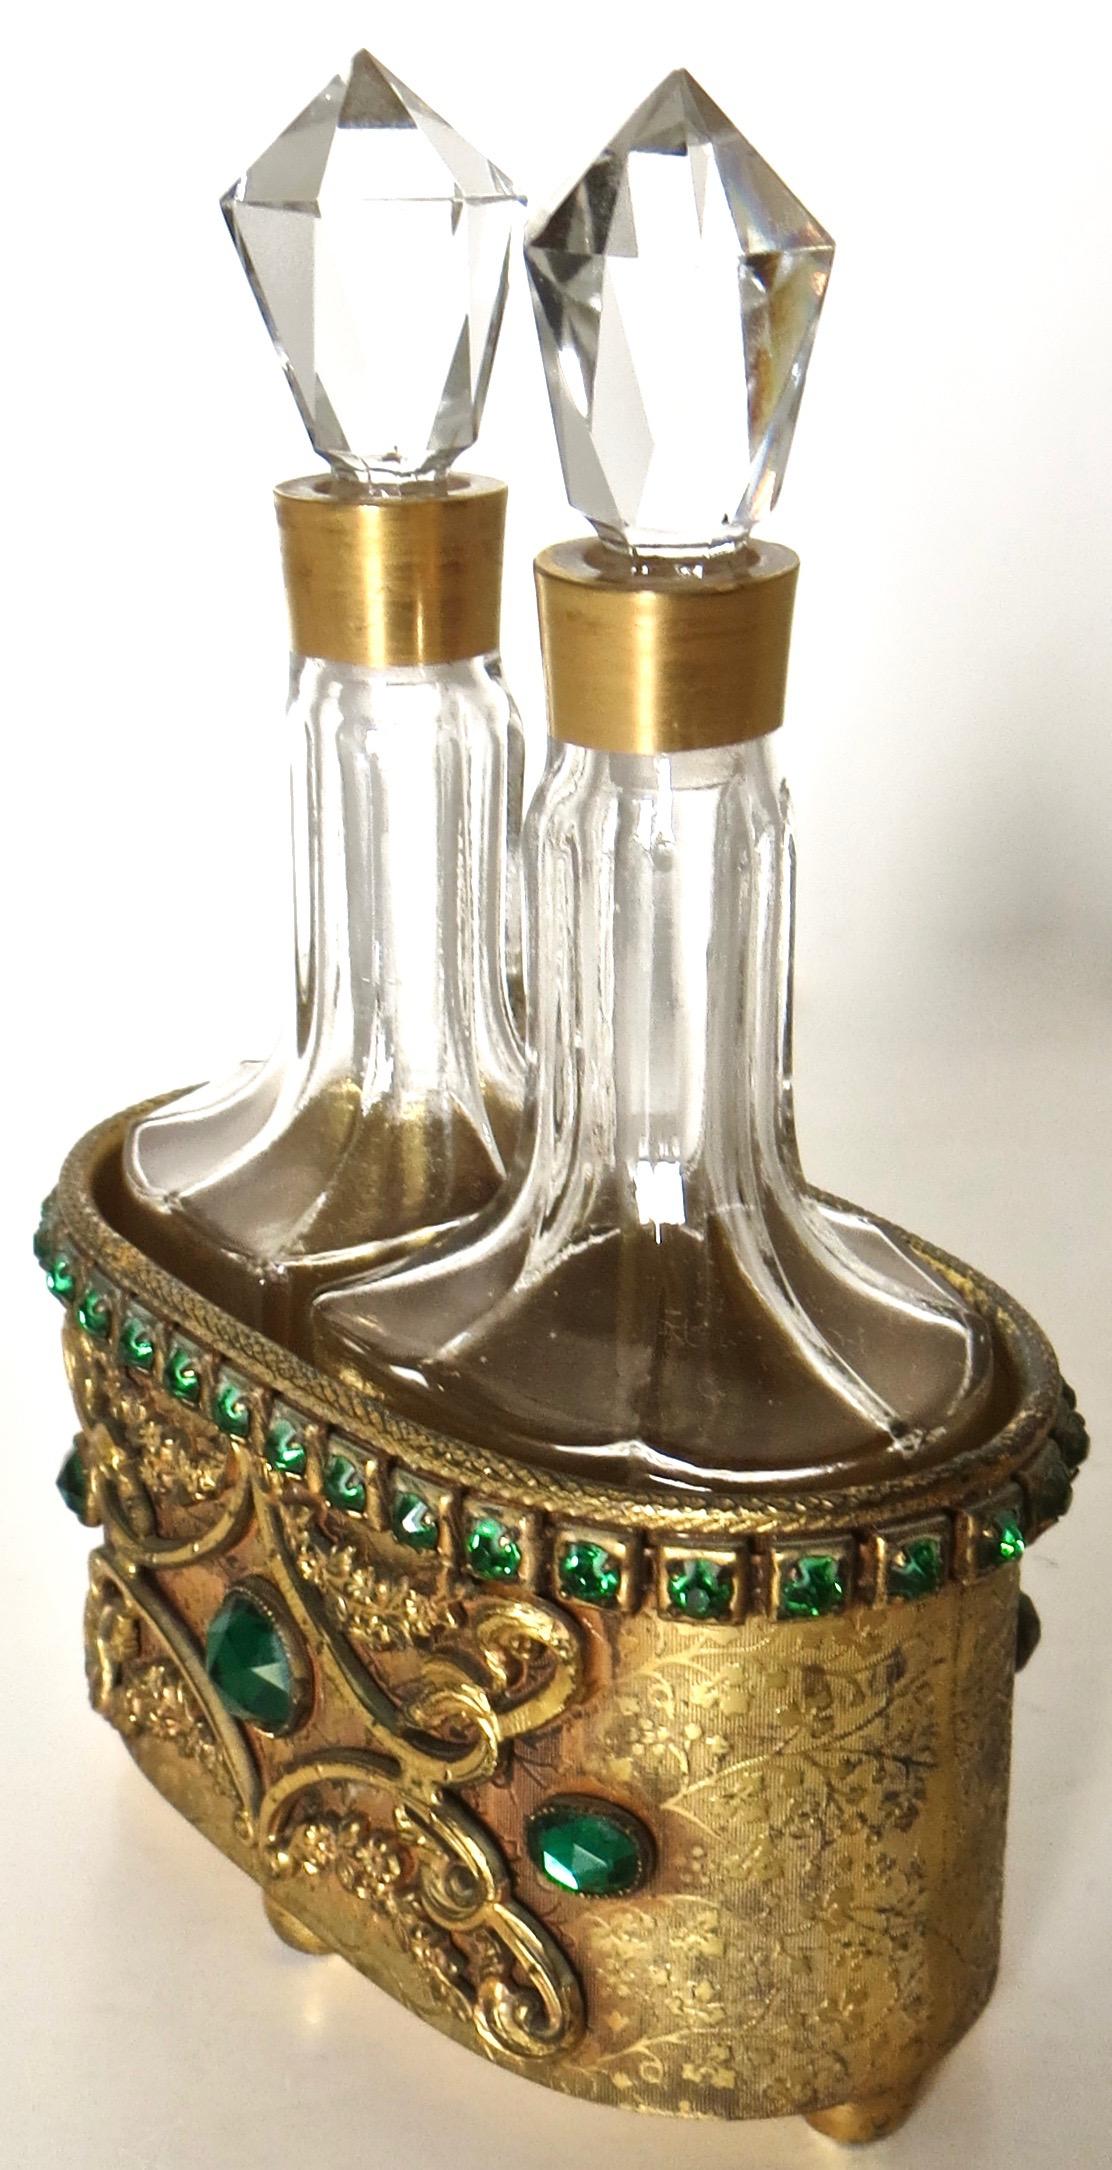 Faceted Two Perfume Bottles in Fitted Casket on Decorated Tray by E. & J. Bass, Ca 1900 For Sale